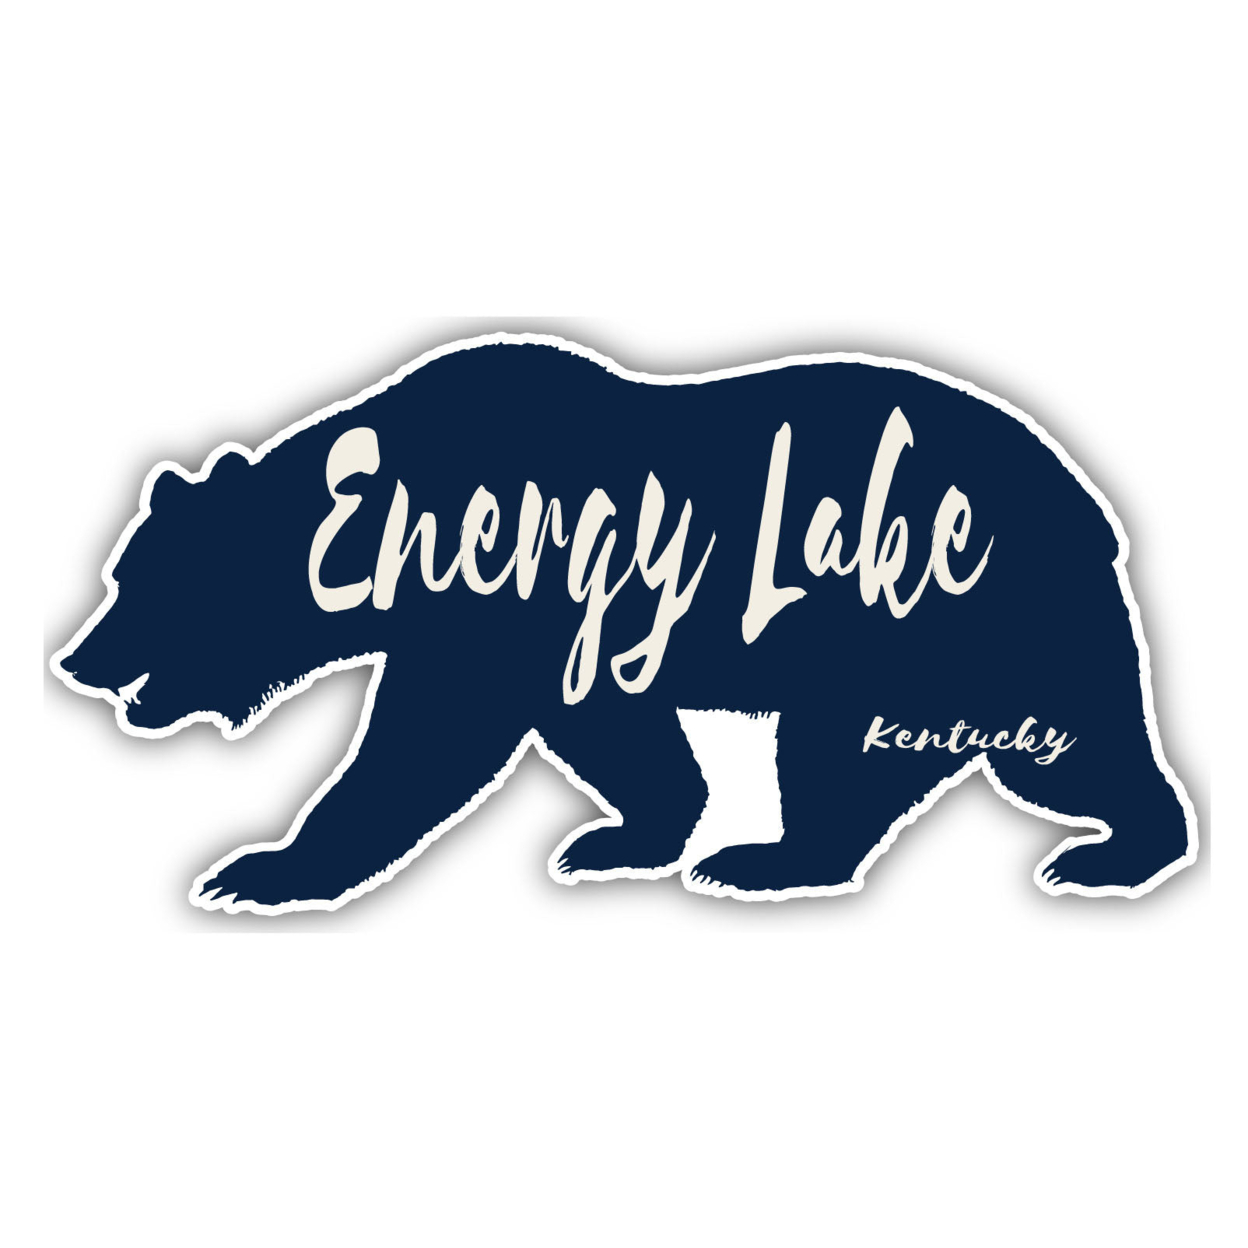 Energy Lake Kentucky Souvenir Decorative Stickers (Choose Theme And Size) - 4-Pack, 2-Inch, Bear